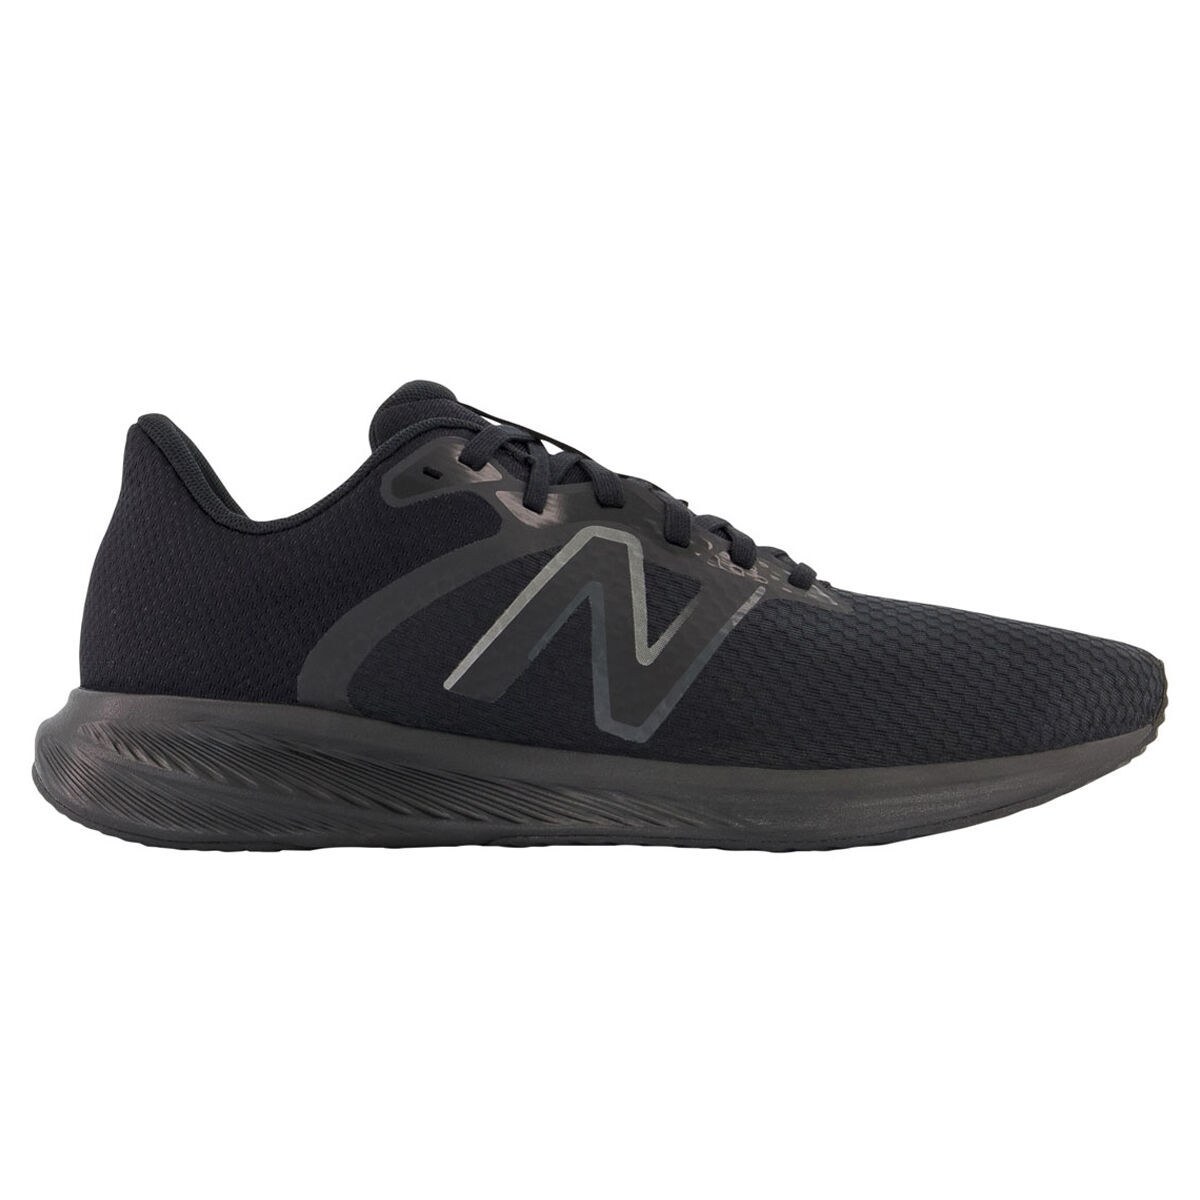 New Balance Women's Sport High Waisted Tight, Black, 2X-Large : :  Clothing, Shoes & Accessories